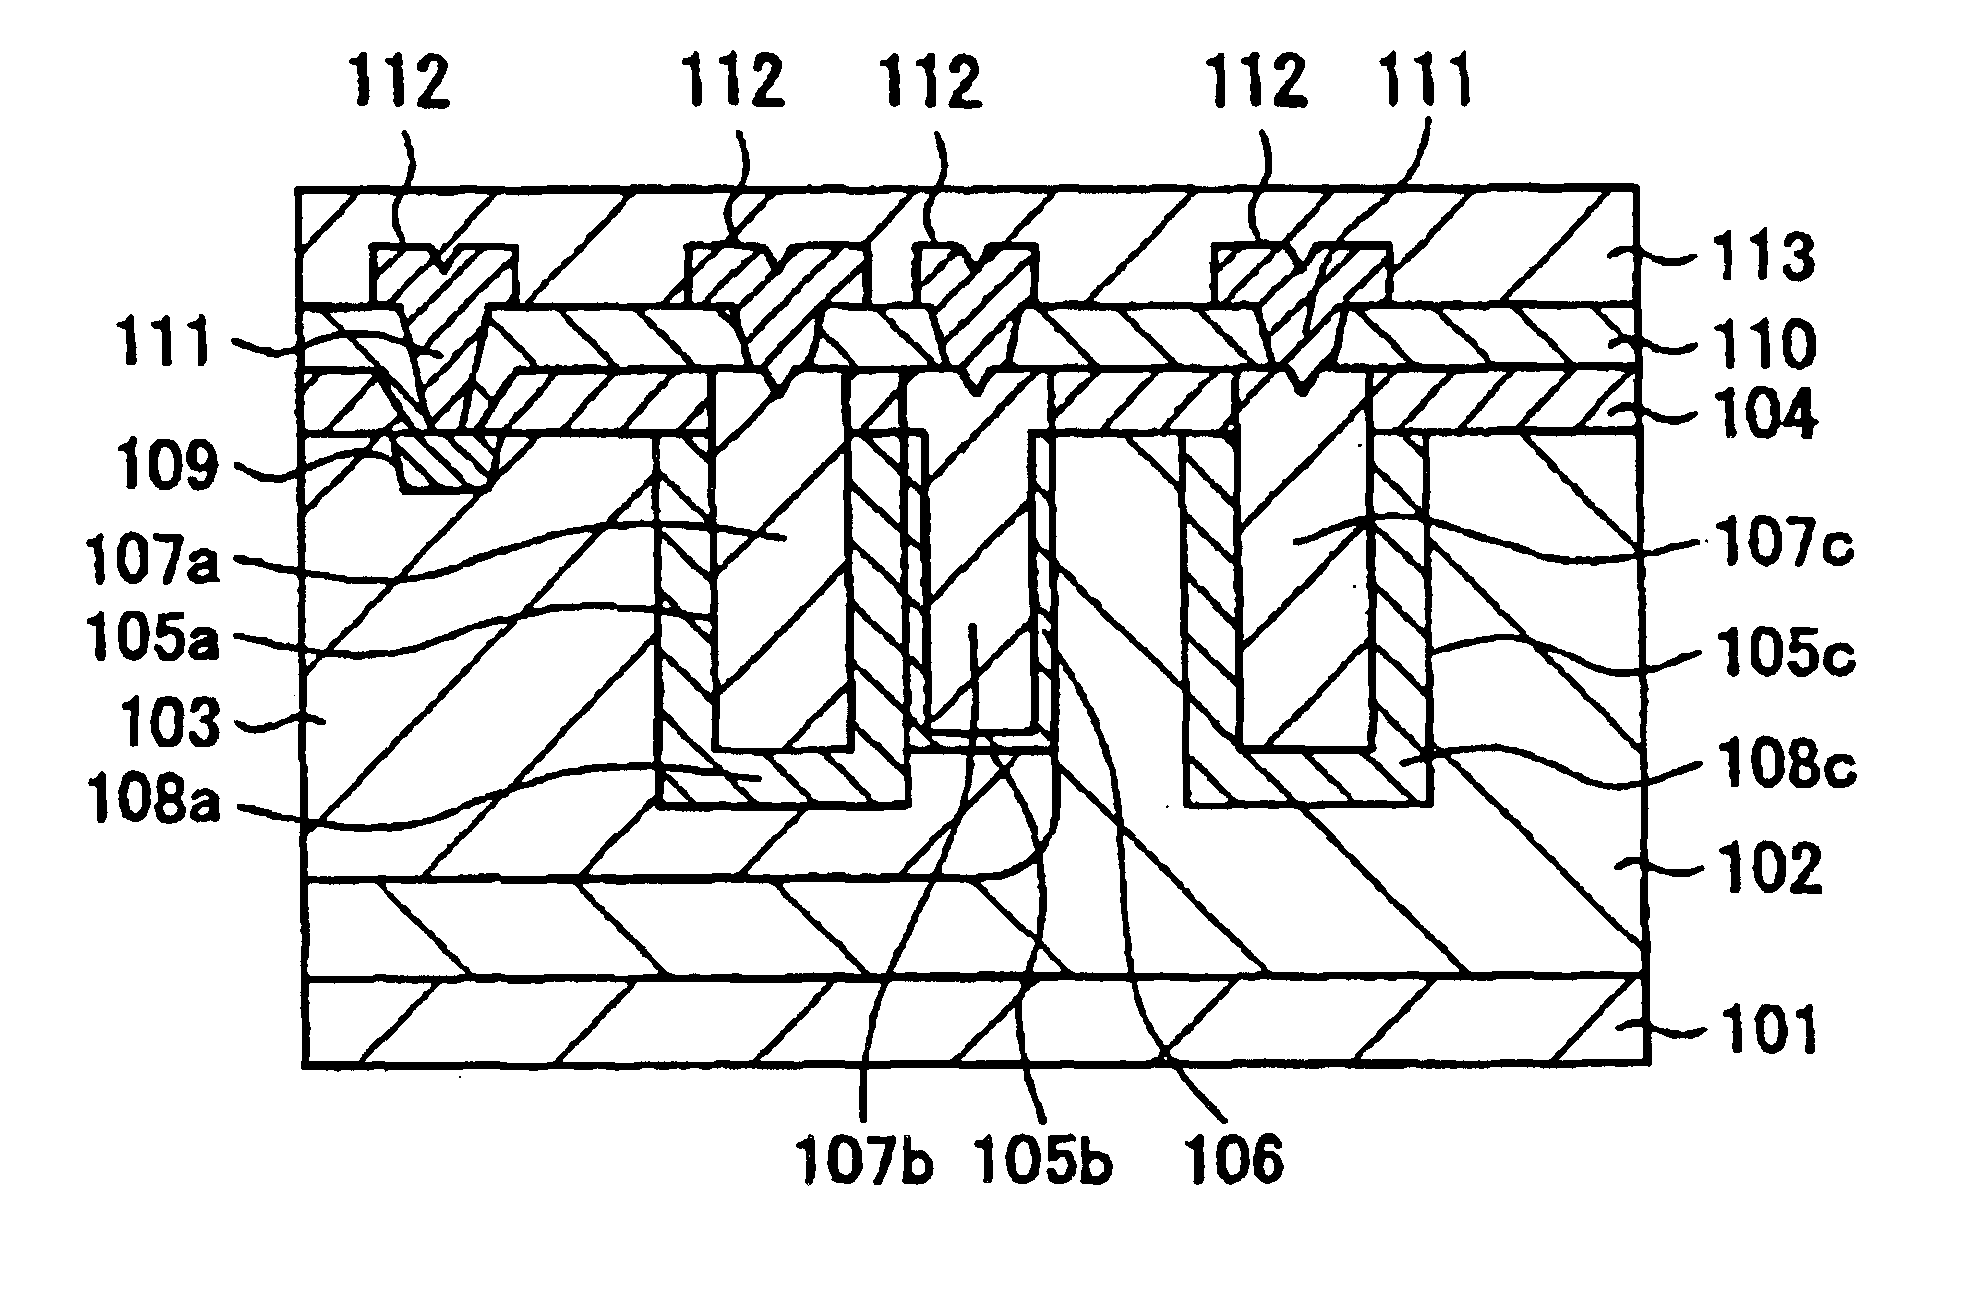 Structure of a lateral diffusion MOS transistor in widespread use as a power control device